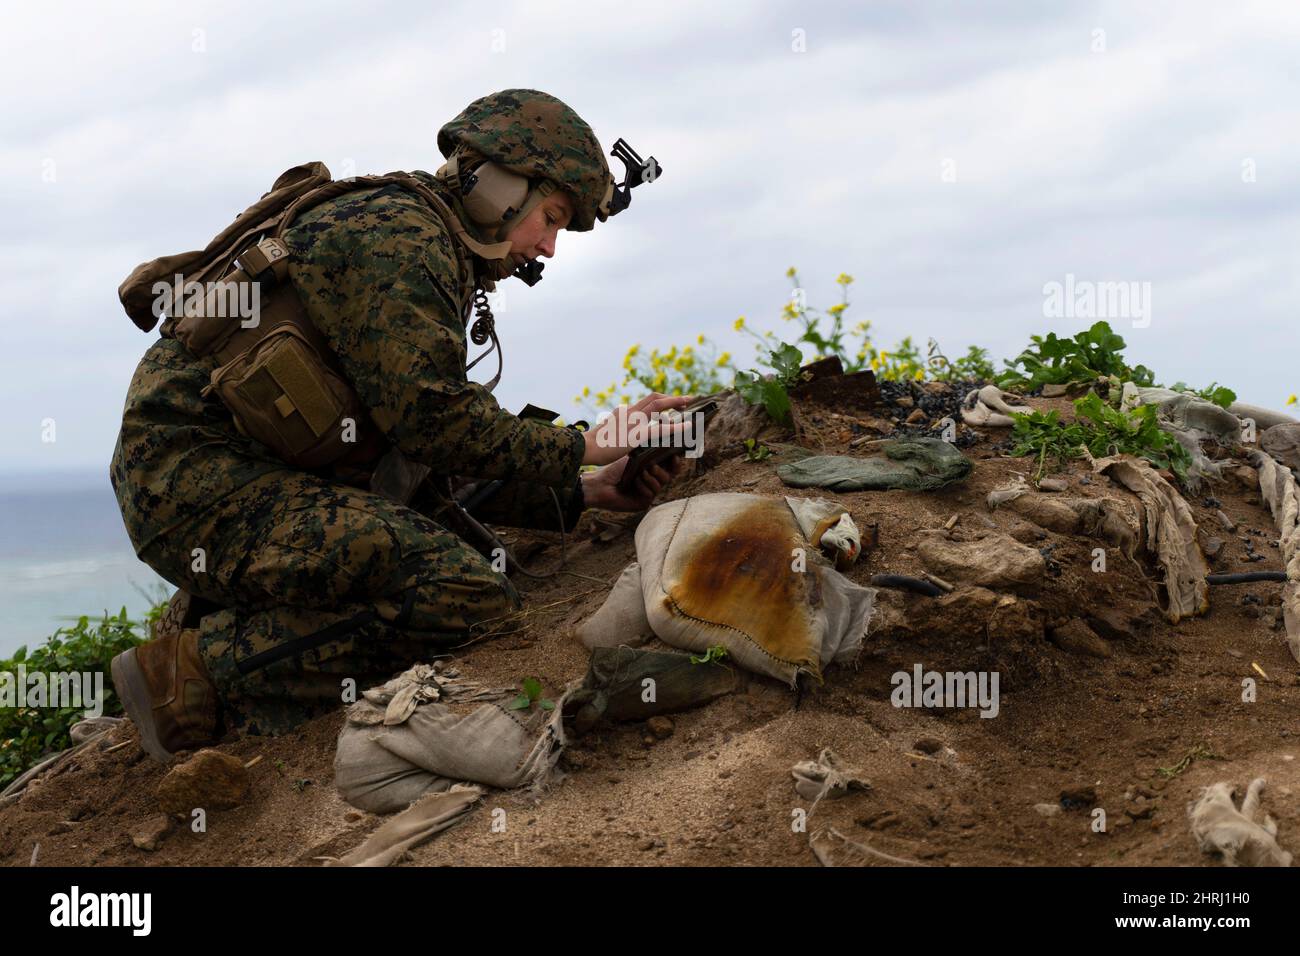 Iirusna, Okinawa, Japan. 16th Feb, 2022. U.S. Marine Corps Maj. Jessica Lucia, air officer, 12th Marines, collects targeting data for an indirect fire mission during Jungle Warfare Exercise 22 off the coast of Okinawa, Japan, Feb. 16, 2022. JWX 22 is a large-scale field training exercise focused on leveraging the integrated capabilities of joint and allied partners to strengthen all-domain awareness, maneuver, and fires across a distributed maritime environment. 2/7 is forward-deployed in the Indo-Pacific under 4th Marines, 3d Marine Division as a part of the Unit Deployment Program. (Cre Stock Photo